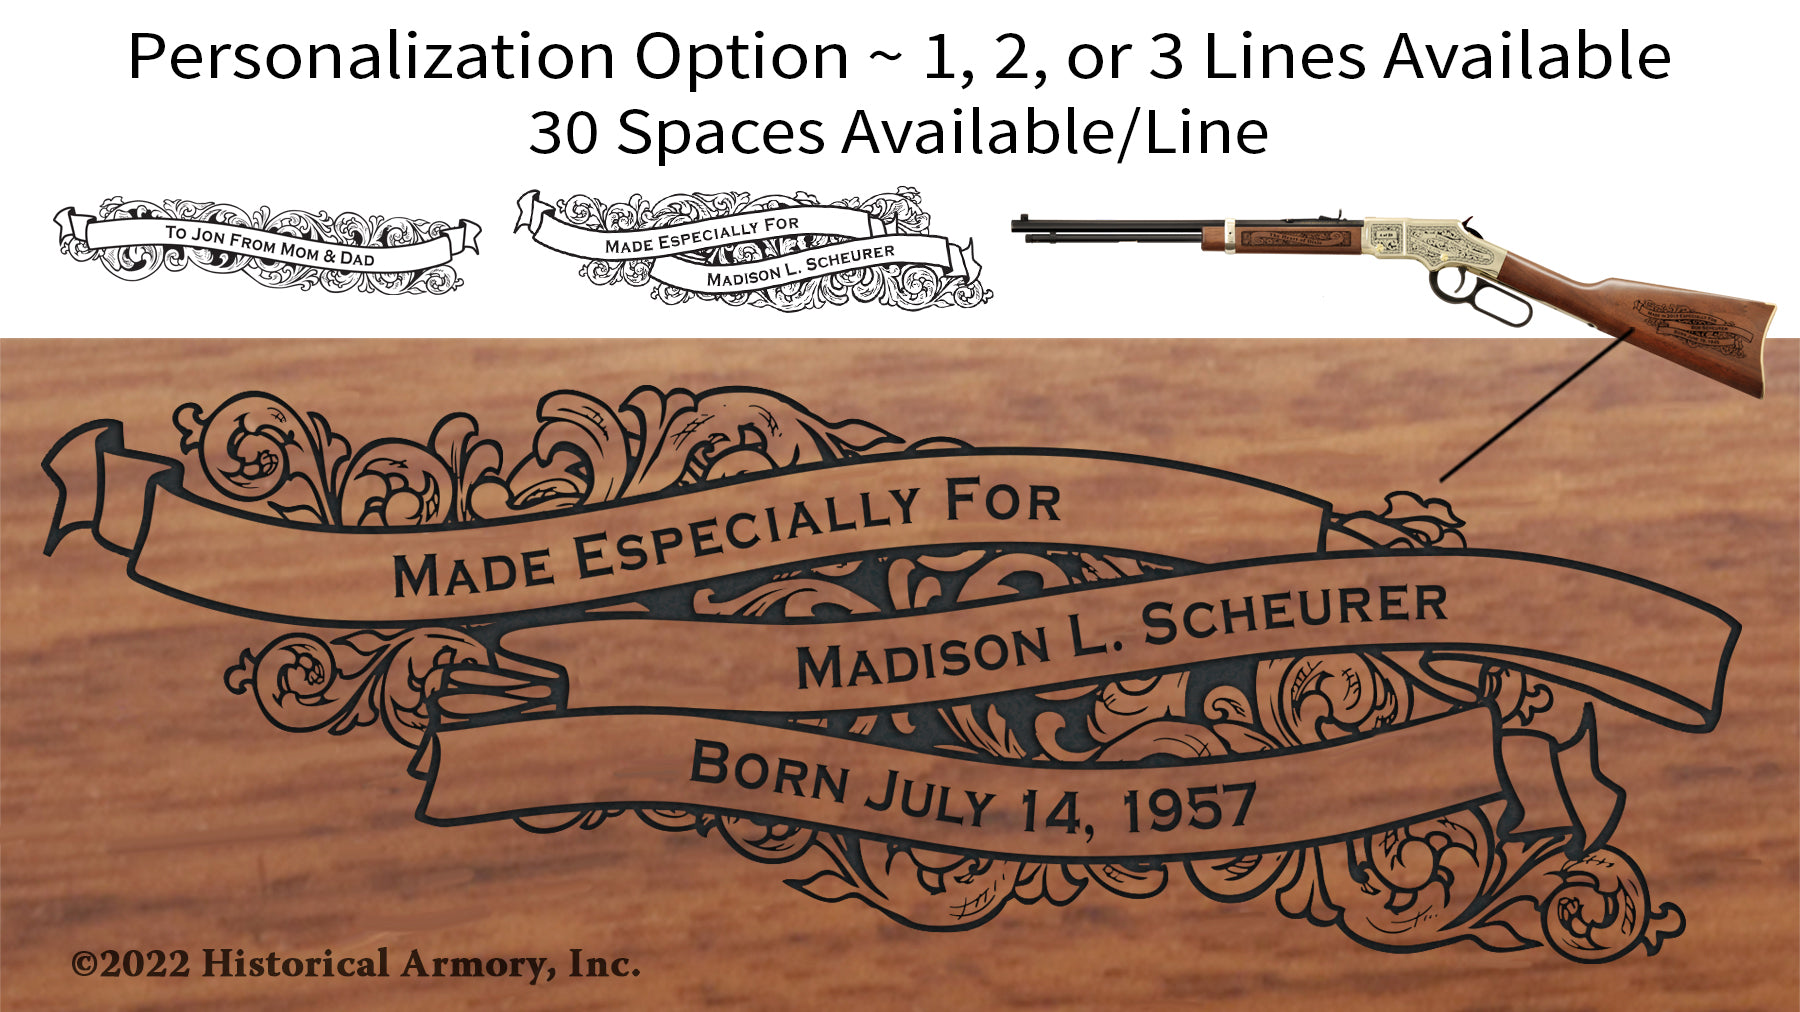 Stearns County Minnesota Engraved Rifle Personalization